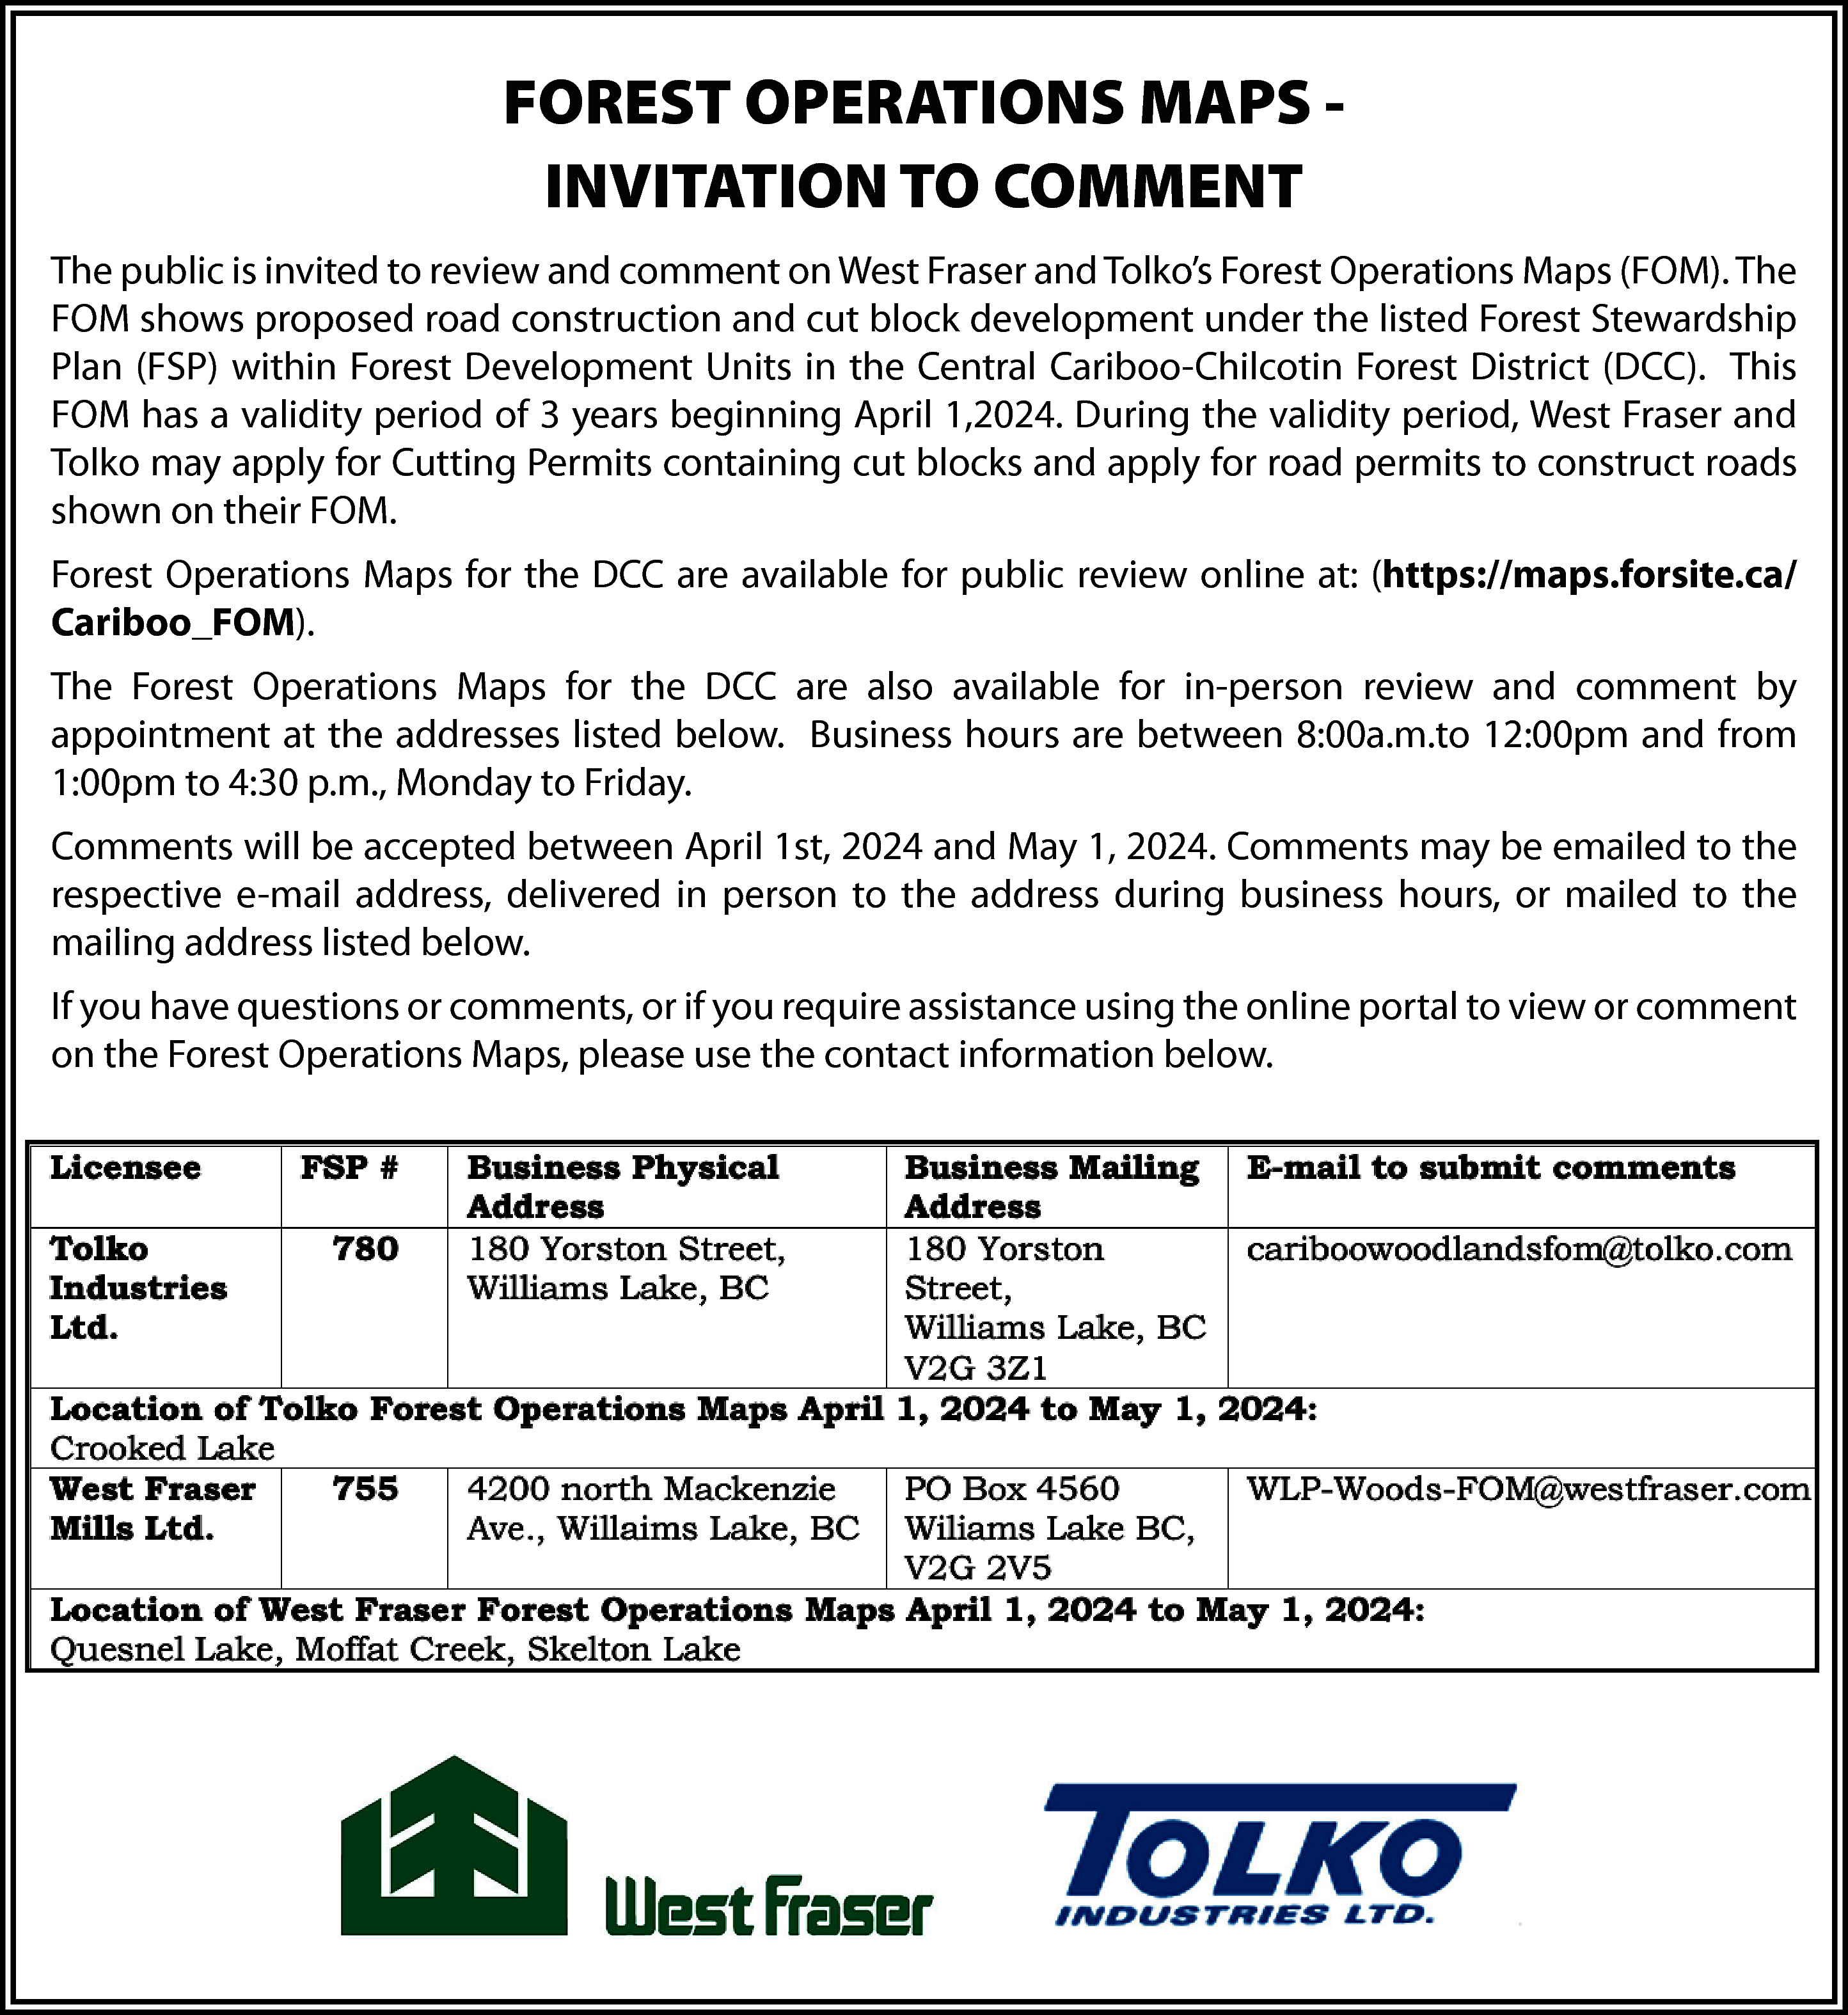 FOREST OPERATIONS MAPS INVITATION TO  FOREST OPERATIONS MAPS INVITATION TO COMMENT  The public is invited to review and comment on West Fraser and Tolko’s Forest Operations Maps (FOM). The  FOM shows proposed road construction and cut block development under the listed Forest Stewardship  Plan (FSP) within Forest Development Units in the Central Cariboo-Chilcotin Forest District (DCC). This  FOM has a validity period of 3 years beginning April 1,2024. During the validity period, West Fraser and  Tolko may apply for Cutting Permits containing cut blocks and apply for road permits to construct roads  shown on their FOM.  Forest Operations Maps for the DCC are available for public review online at: (https://maps.forsite.ca/  Cariboo_FOM).  The Forest Operations Maps for the DCC are also available for in-person review and comment by  appointment at the addresses listed below. Business hours are between 8:00a.m.to 12:00pm and from  1:00pm to 4:30 p.m., Monday to Friday.  Comments will be accepted between April 1st, 2024 and May 1, 2024. Comments may be emailed to the  respective e-mail address, delivered in person to the address during business hours, or mailed to the  mailing address listed below.  If you have questions or comments, or if you require assistance using the online portal to view or comment  on the Forest Operations Maps, please use the contact information below.    